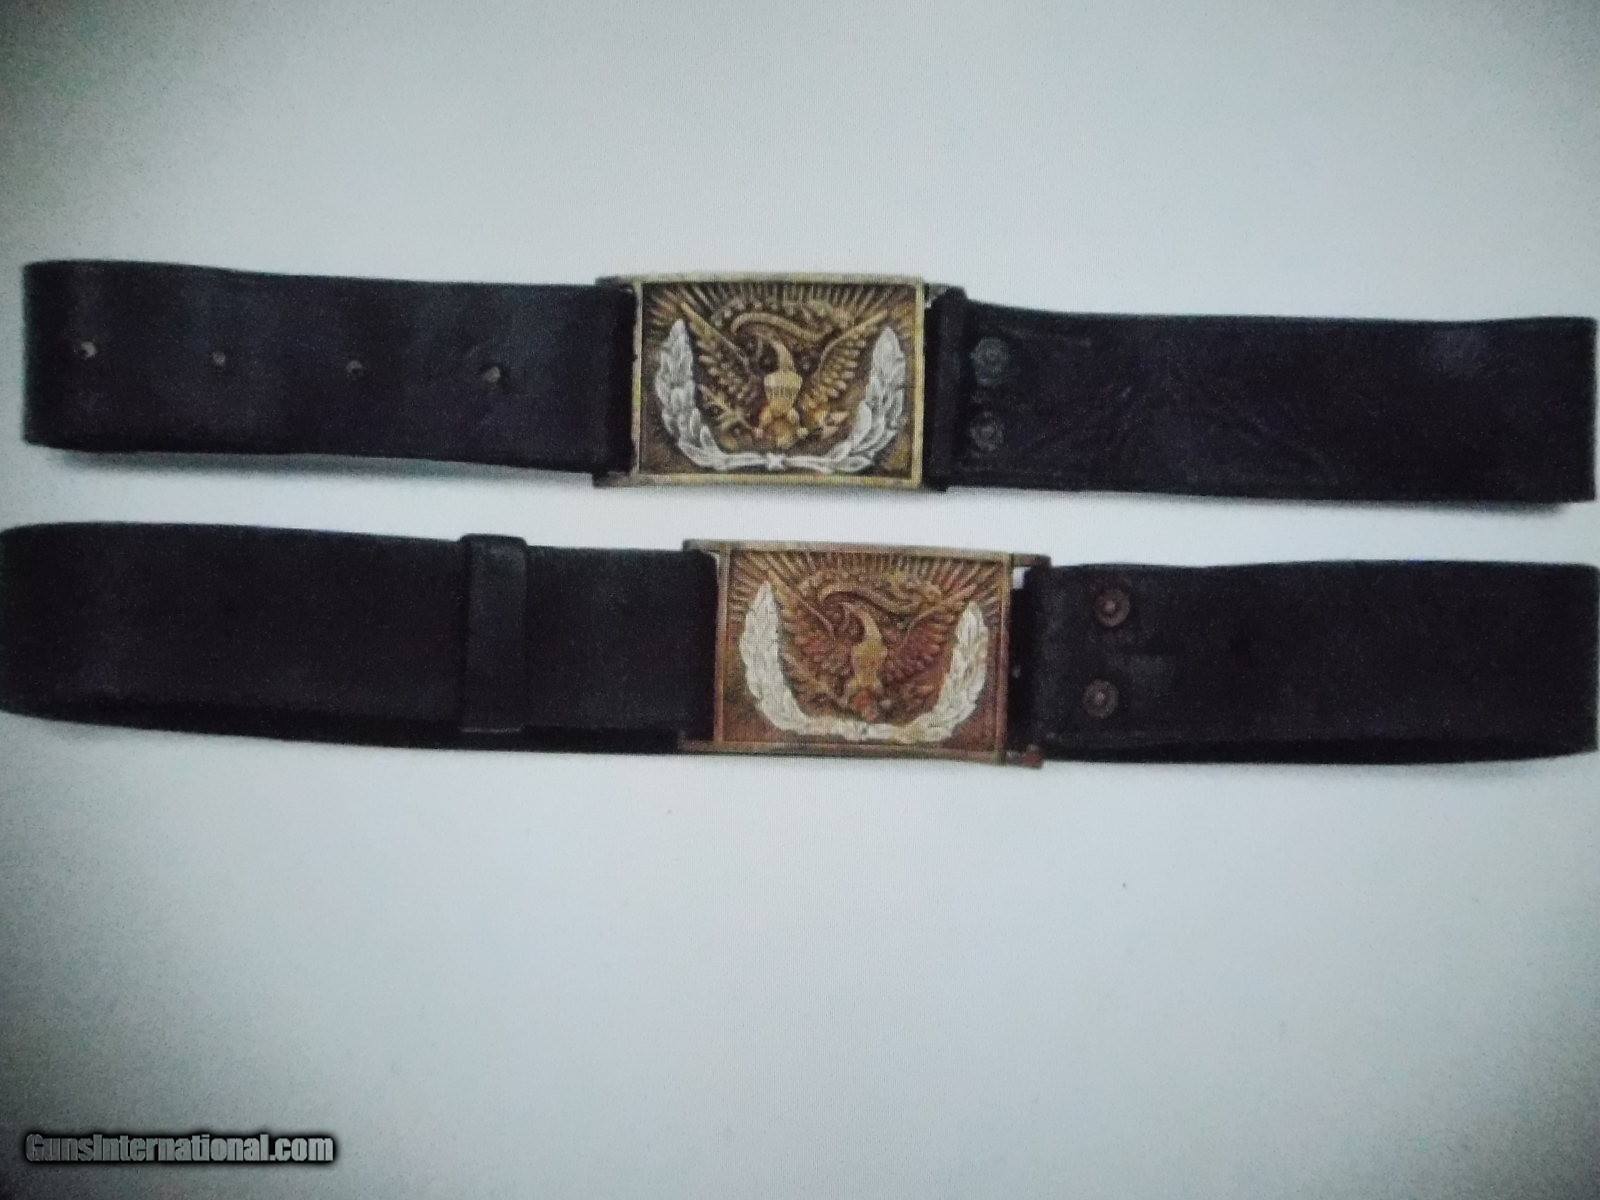 Sold at Auction: Civil War belt and buckle